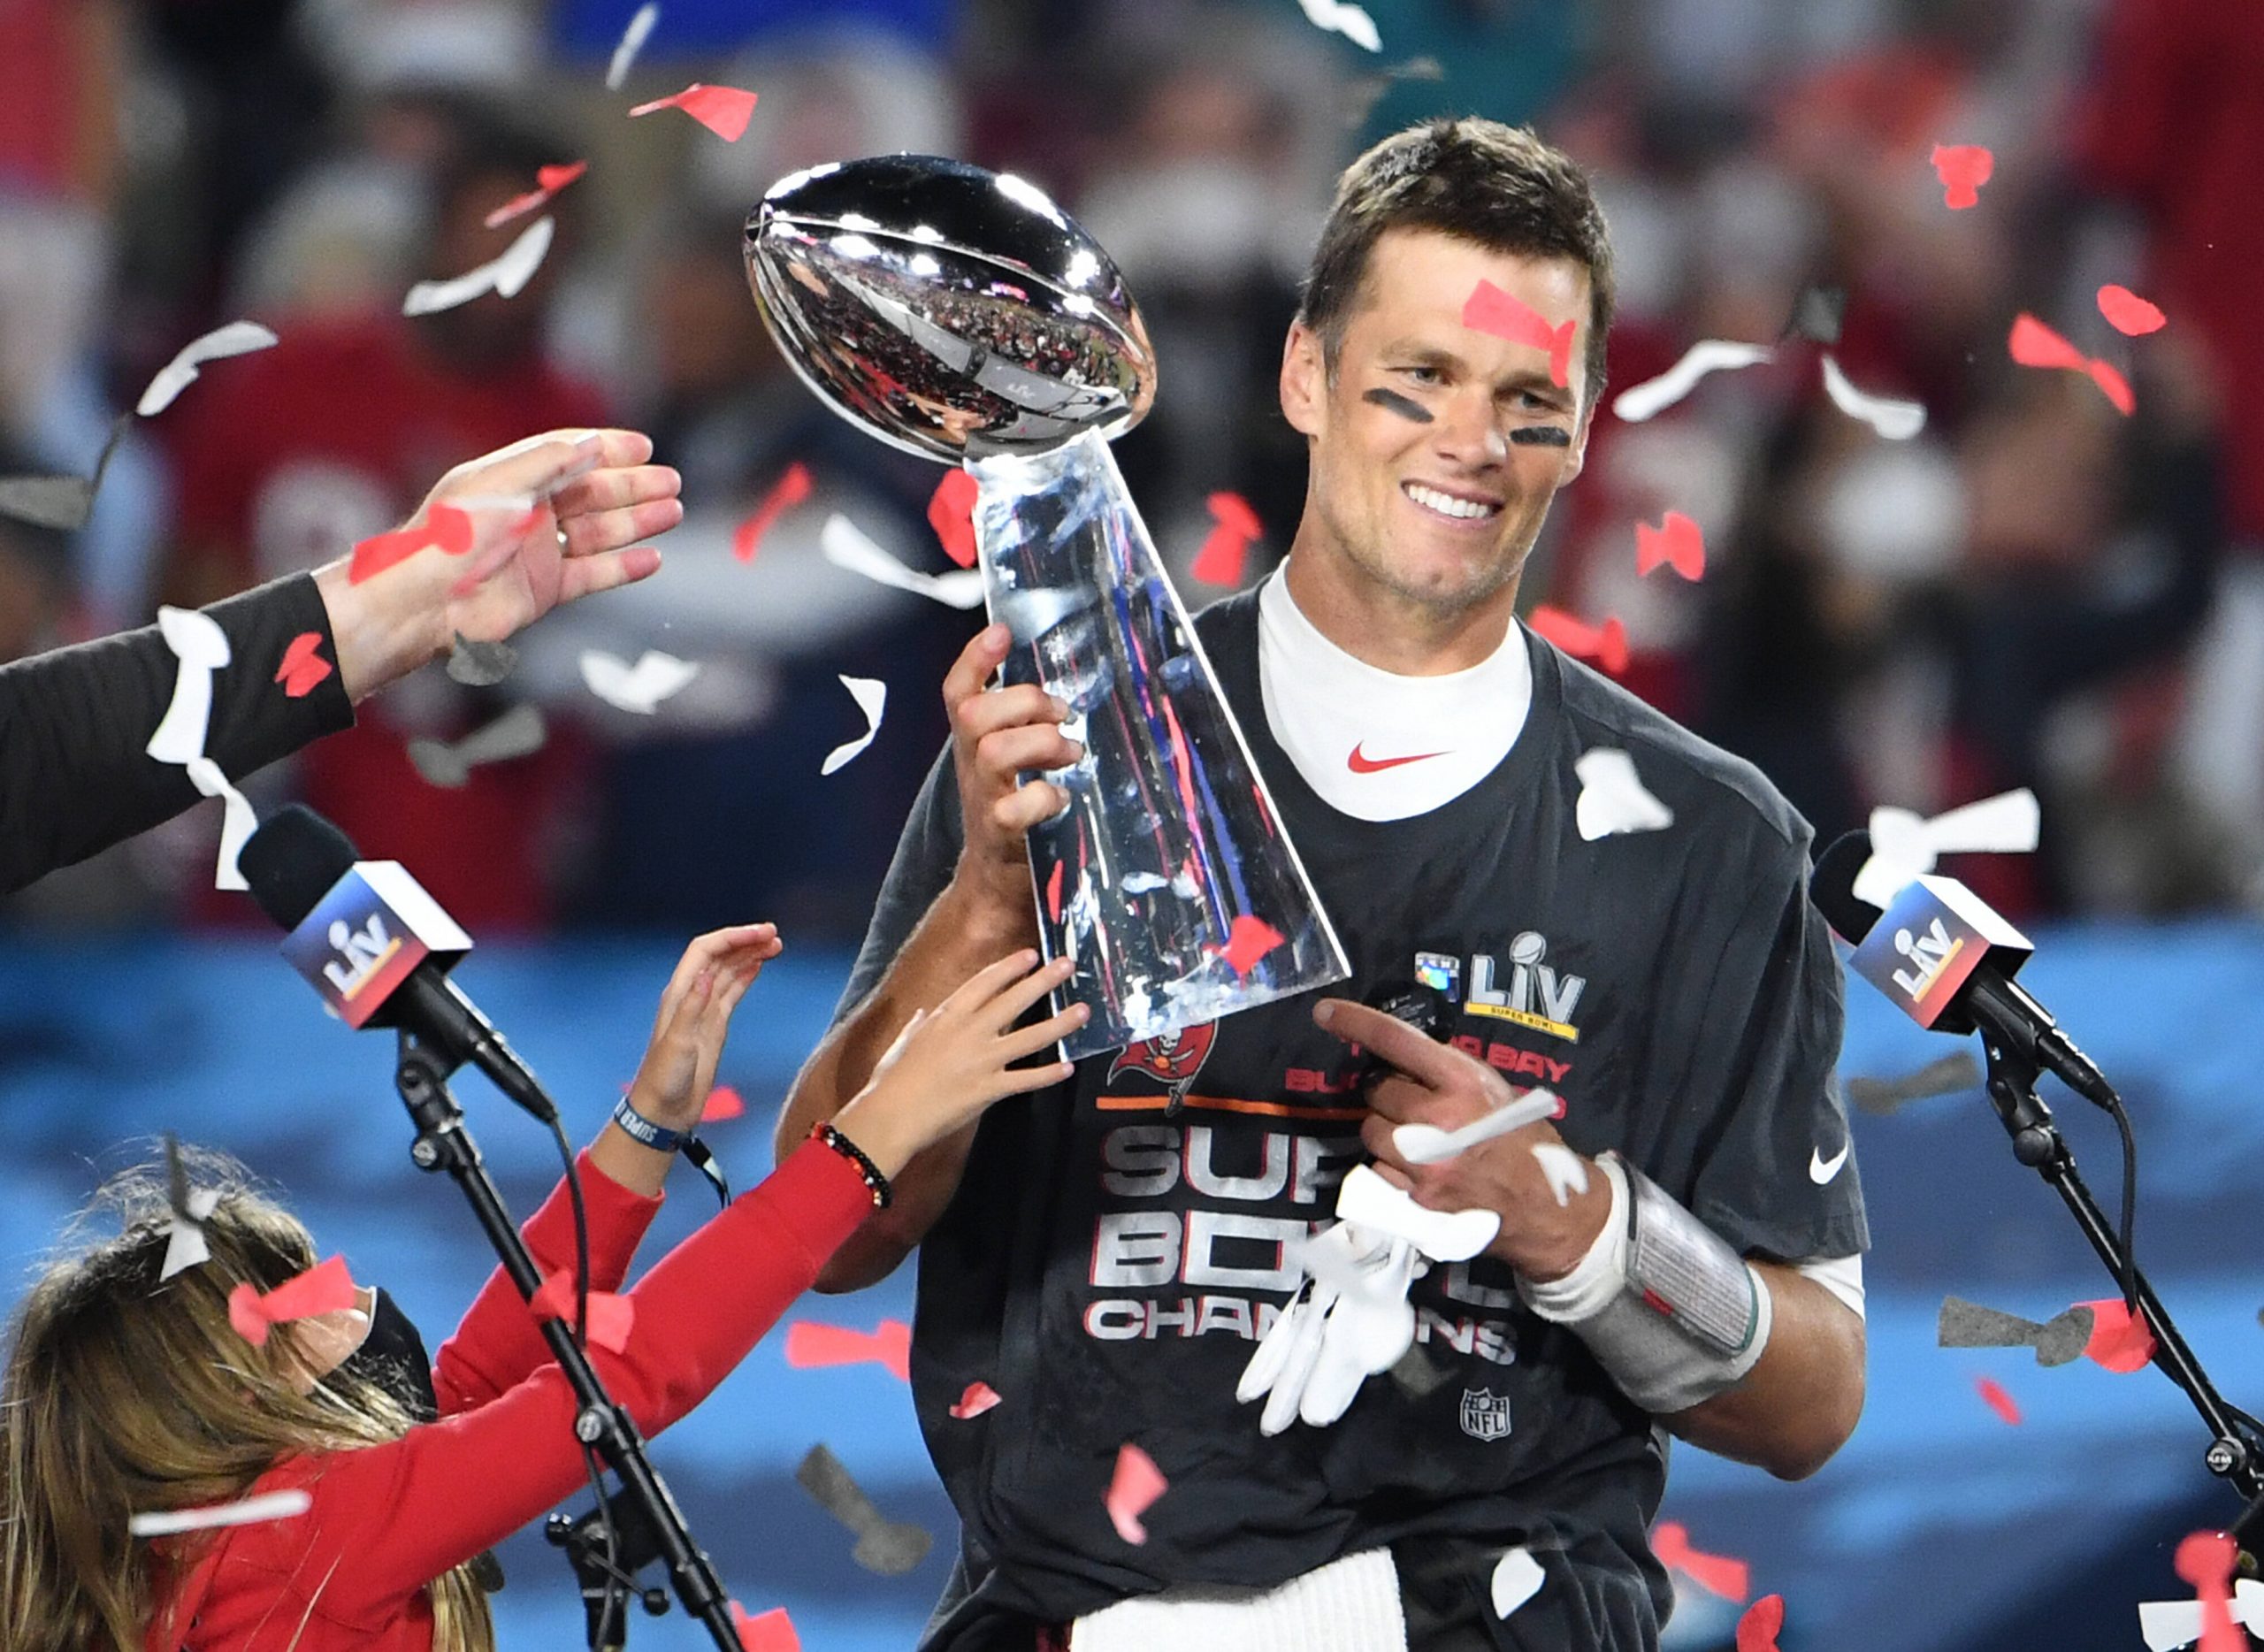 Tampa Bay Buccaneers quarterback Tom Brady stands with one of his children as he is presented the Vince Lombardi Trophy